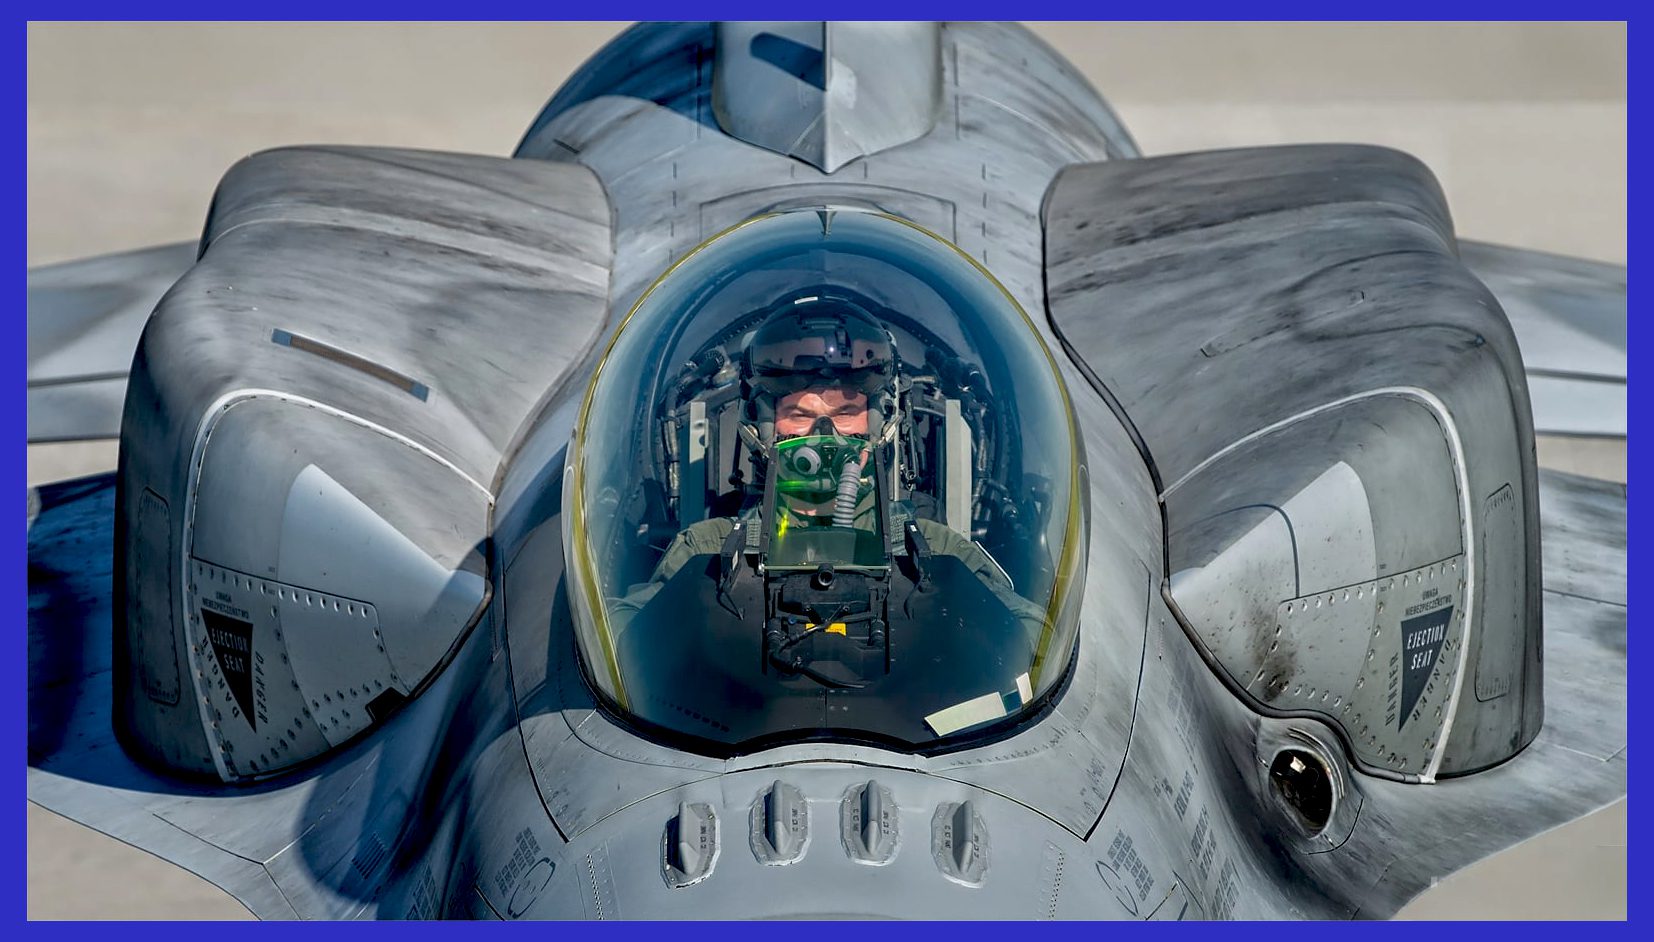 Photo Credit: Hesja Air-Art Photography / An air-to-air, close-up image of an F-16C/D cockpit and Conformal Fuel Tank design.